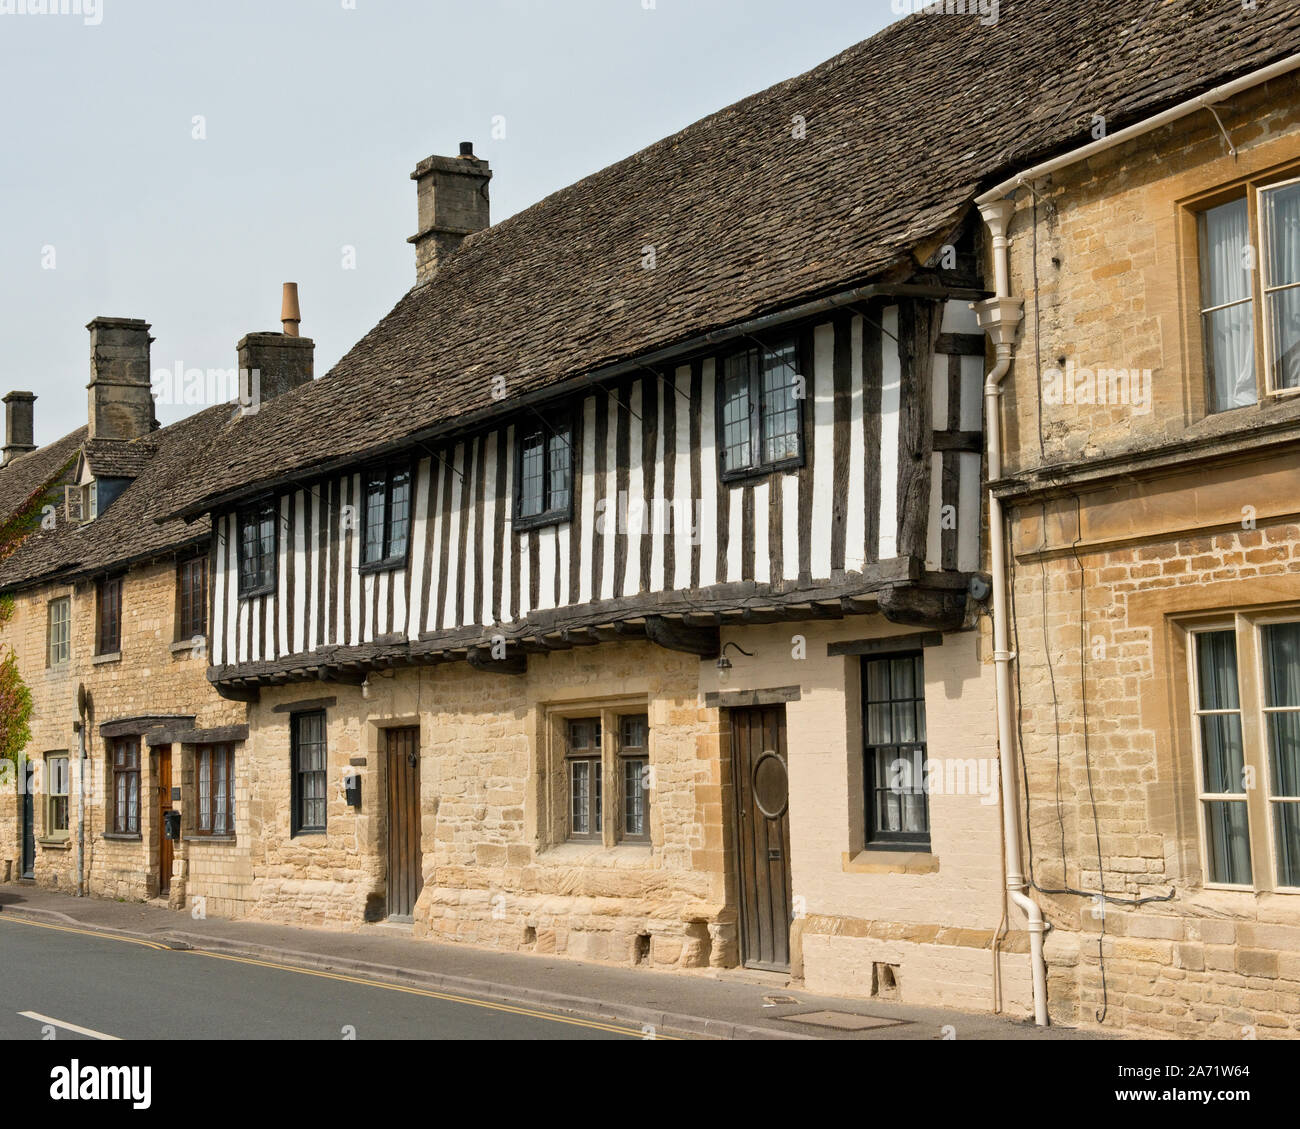 Anicient half-timber house building in Stow-on-the-Wold, England Stock Photo